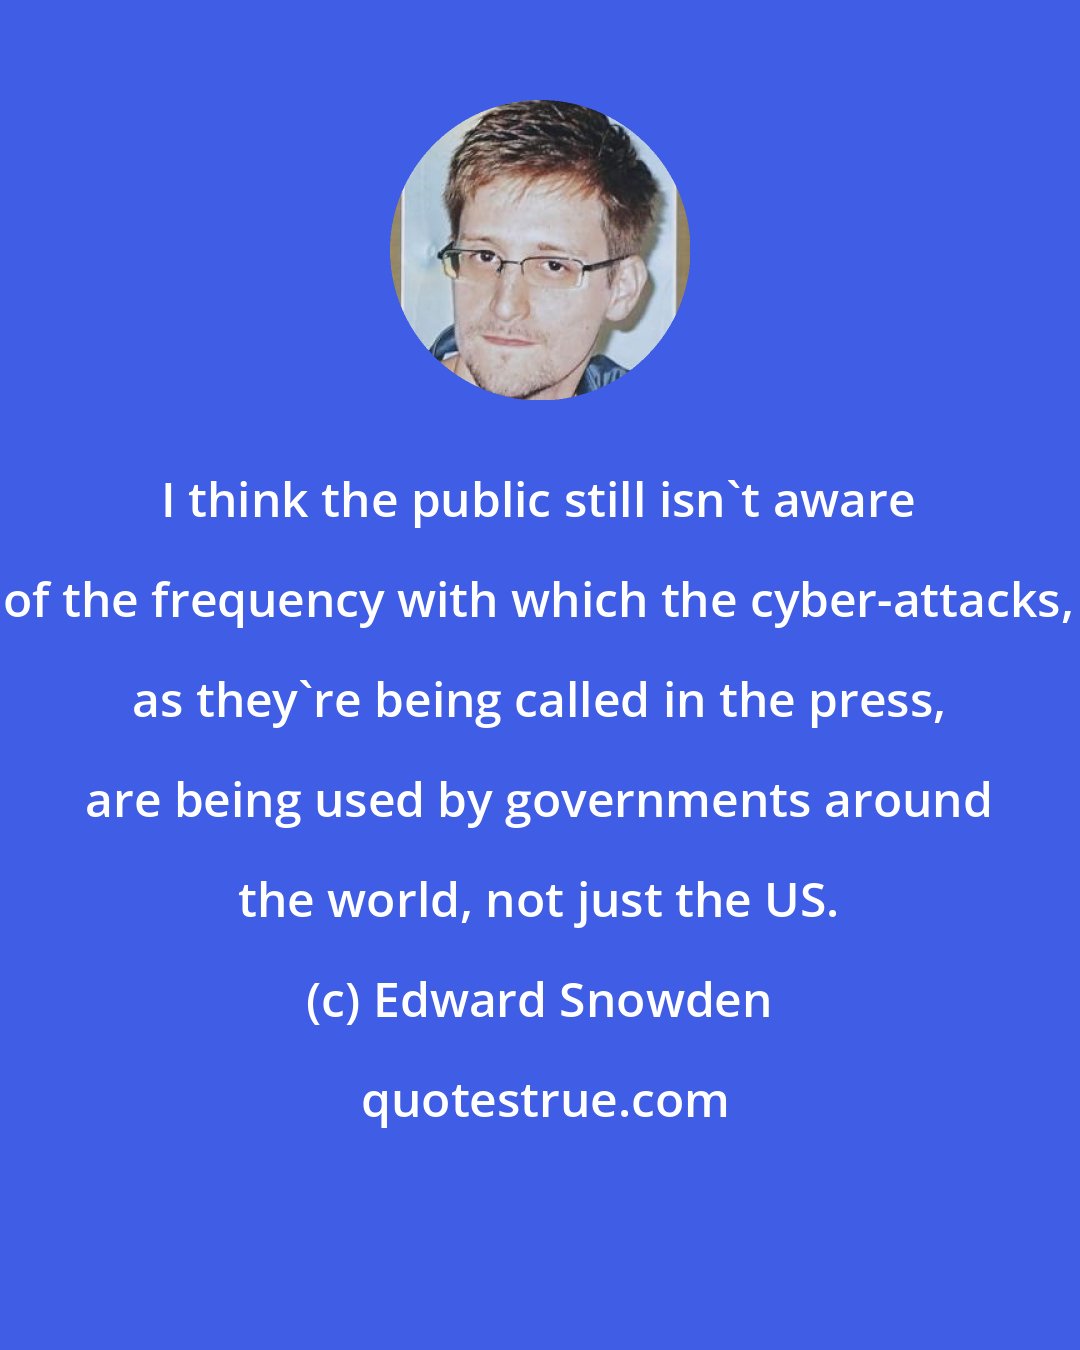 Edward Snowden: I think the public still isn't aware of the frequency with which the cyber-attacks, as they're being called in the press, are being used by governments around the world, not just the US.